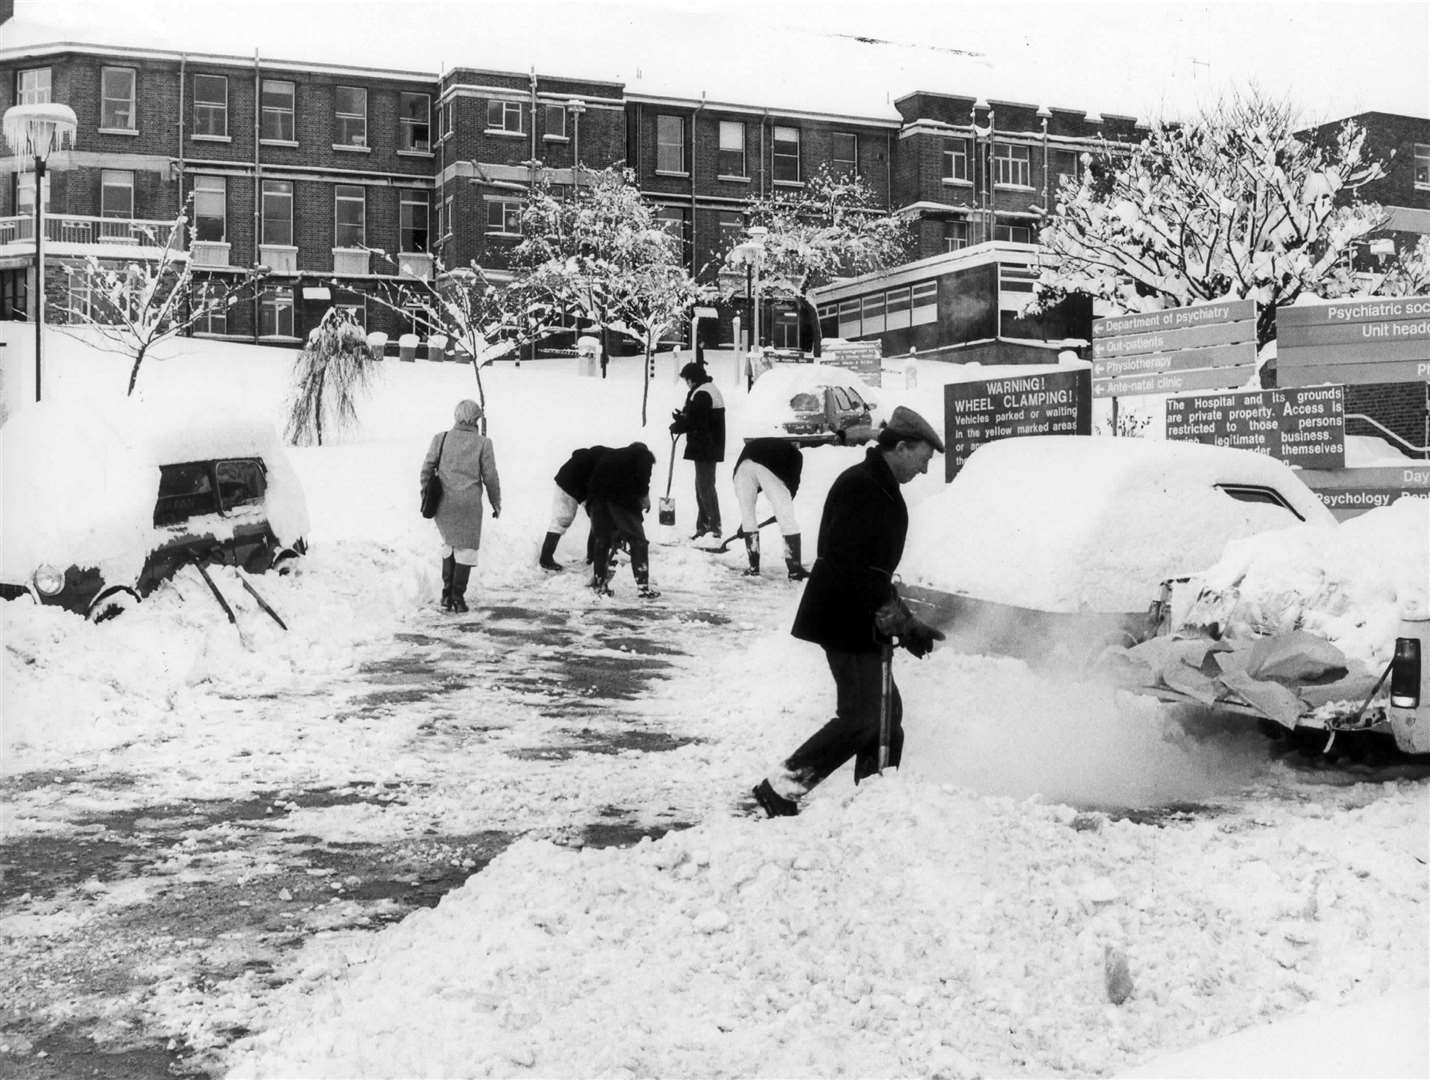 Heavy snowfall at All Saints Hospital in Chatham in January 1987, which closed at the turn of the century when services were moved to Medway Maritime Hospital. The site is now home to a housing estate